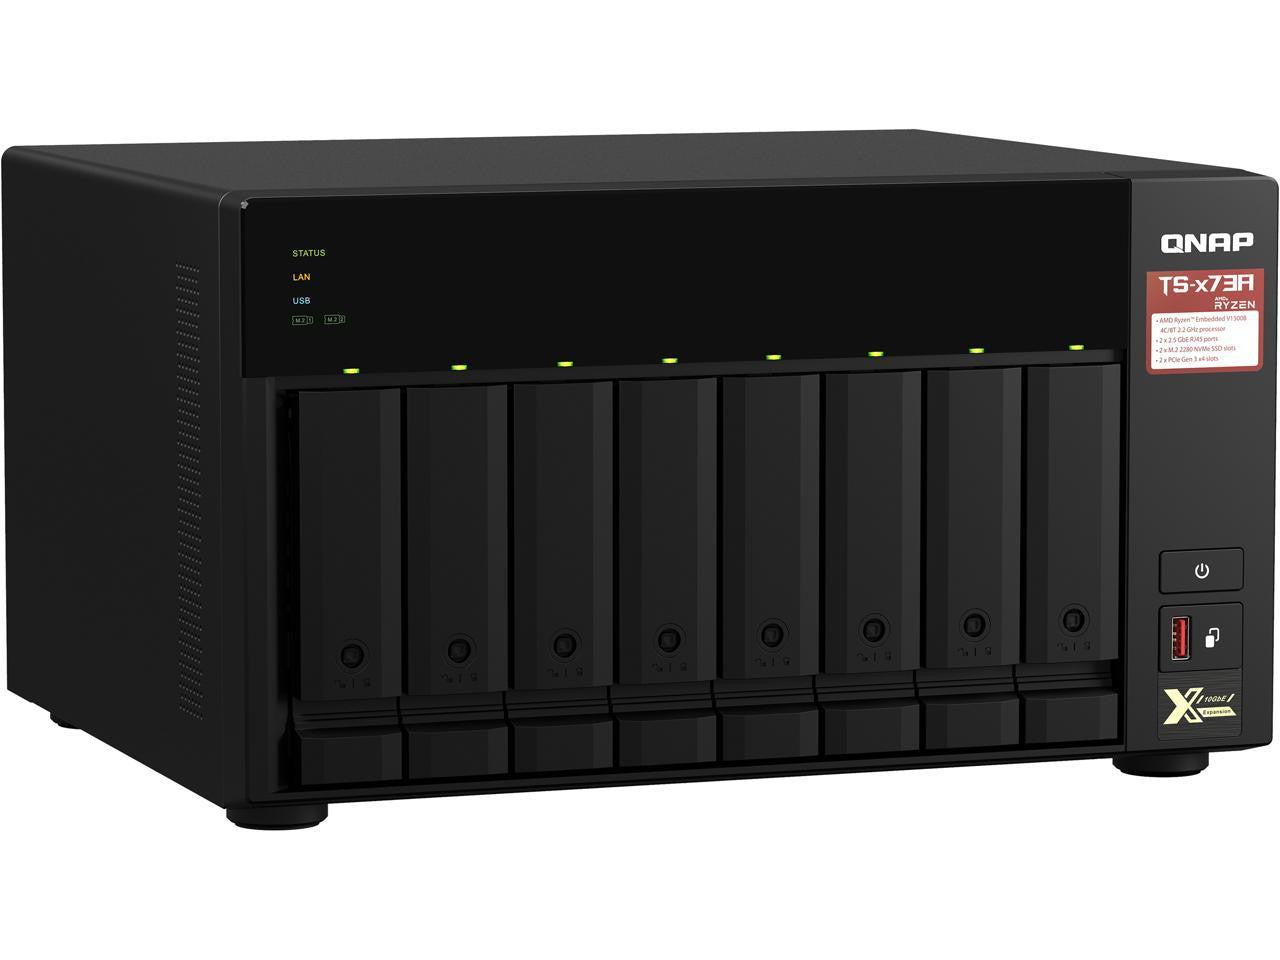 QNAP TS-873A 8-BAY NAS with 16GB DDR4 RAM and 80TB (8x10TB) Seagate Ironwolf NAS Drives Fully Assembled and Tested